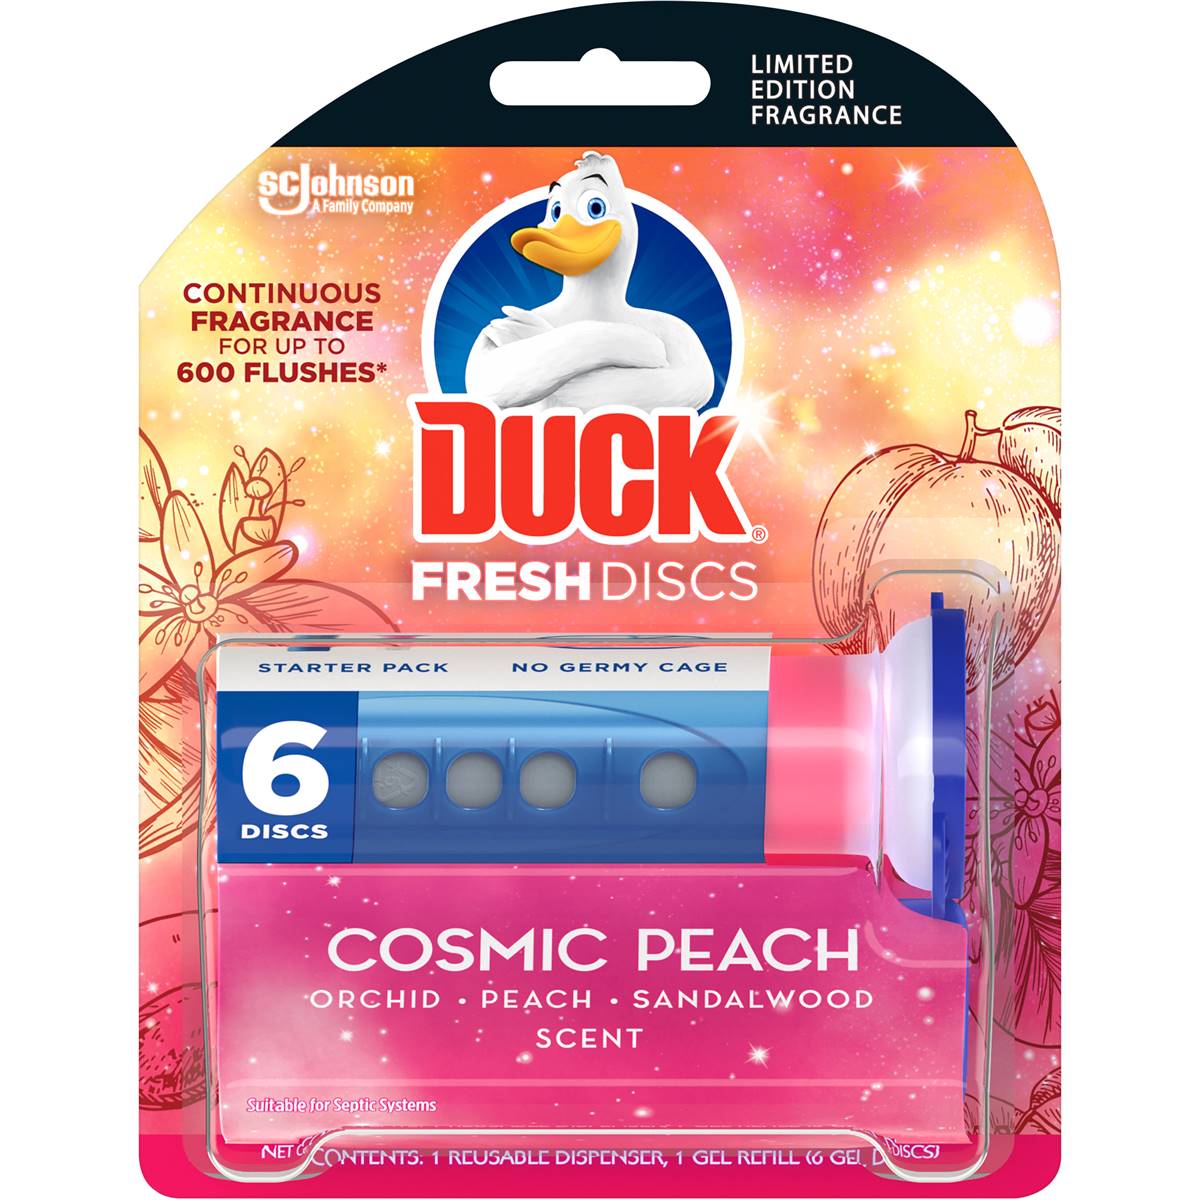 Duck Fresh Discs Toilet Cleaner Limited Edition 36ml